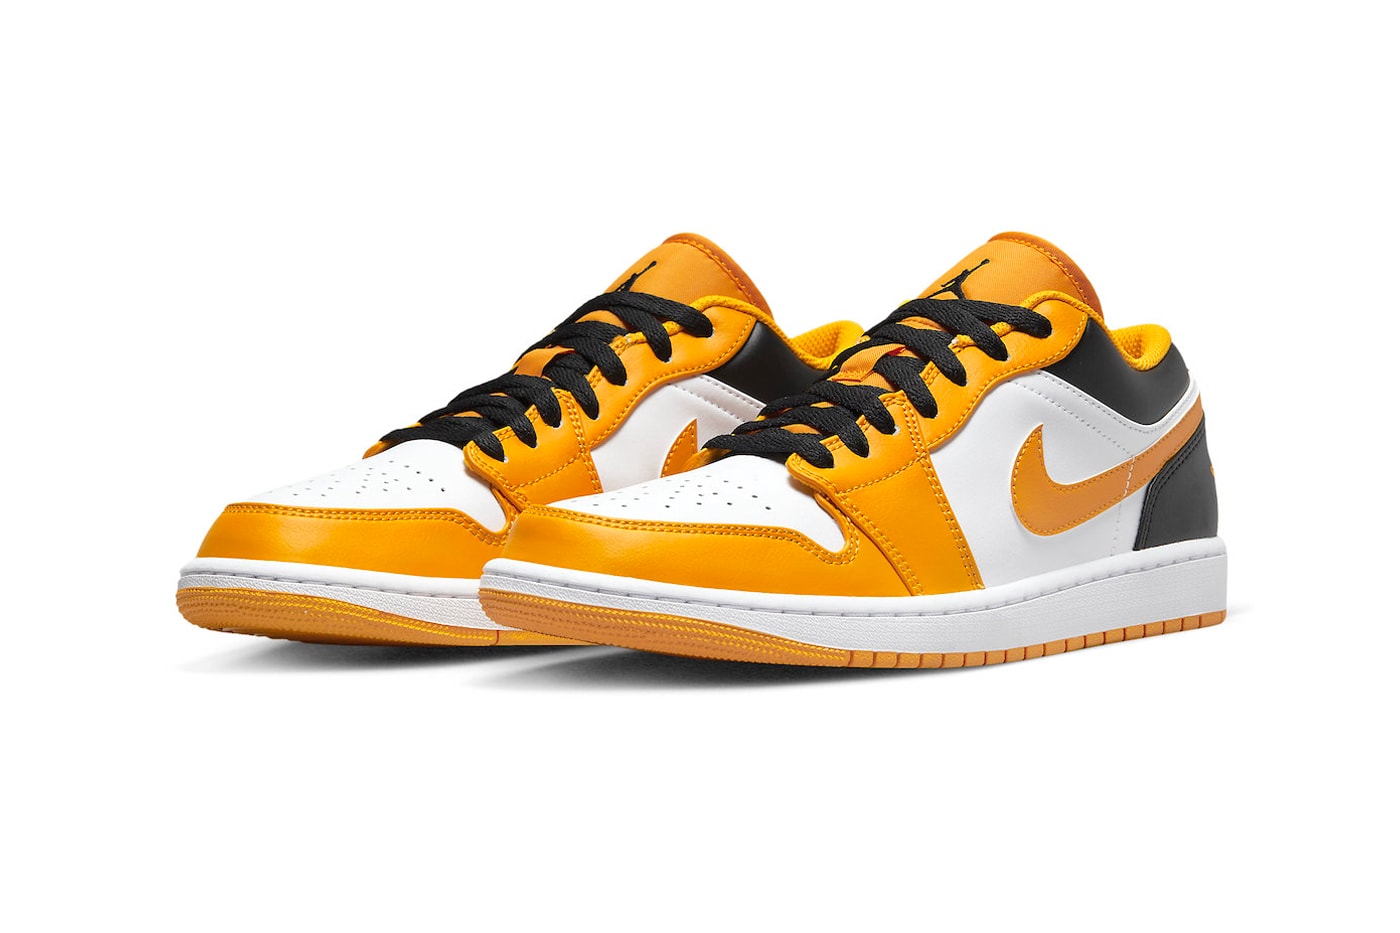 Air 1 Low "Taxi" Official Look |